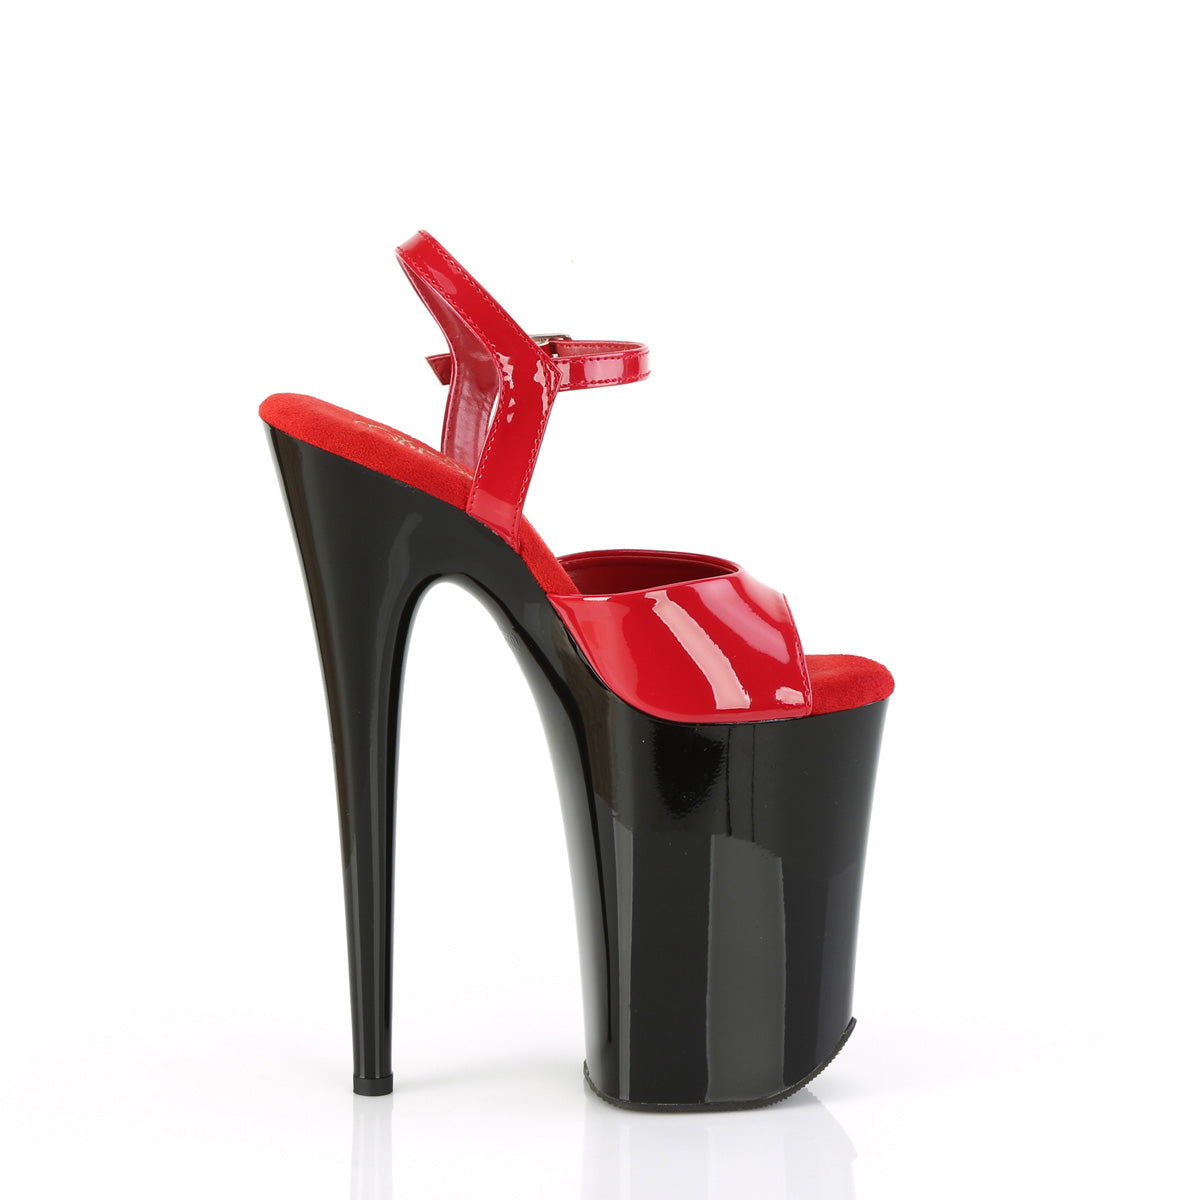 INFINITY-909 Pleaser Red Patent/Black Platform Shoes [Sexy Shoes]